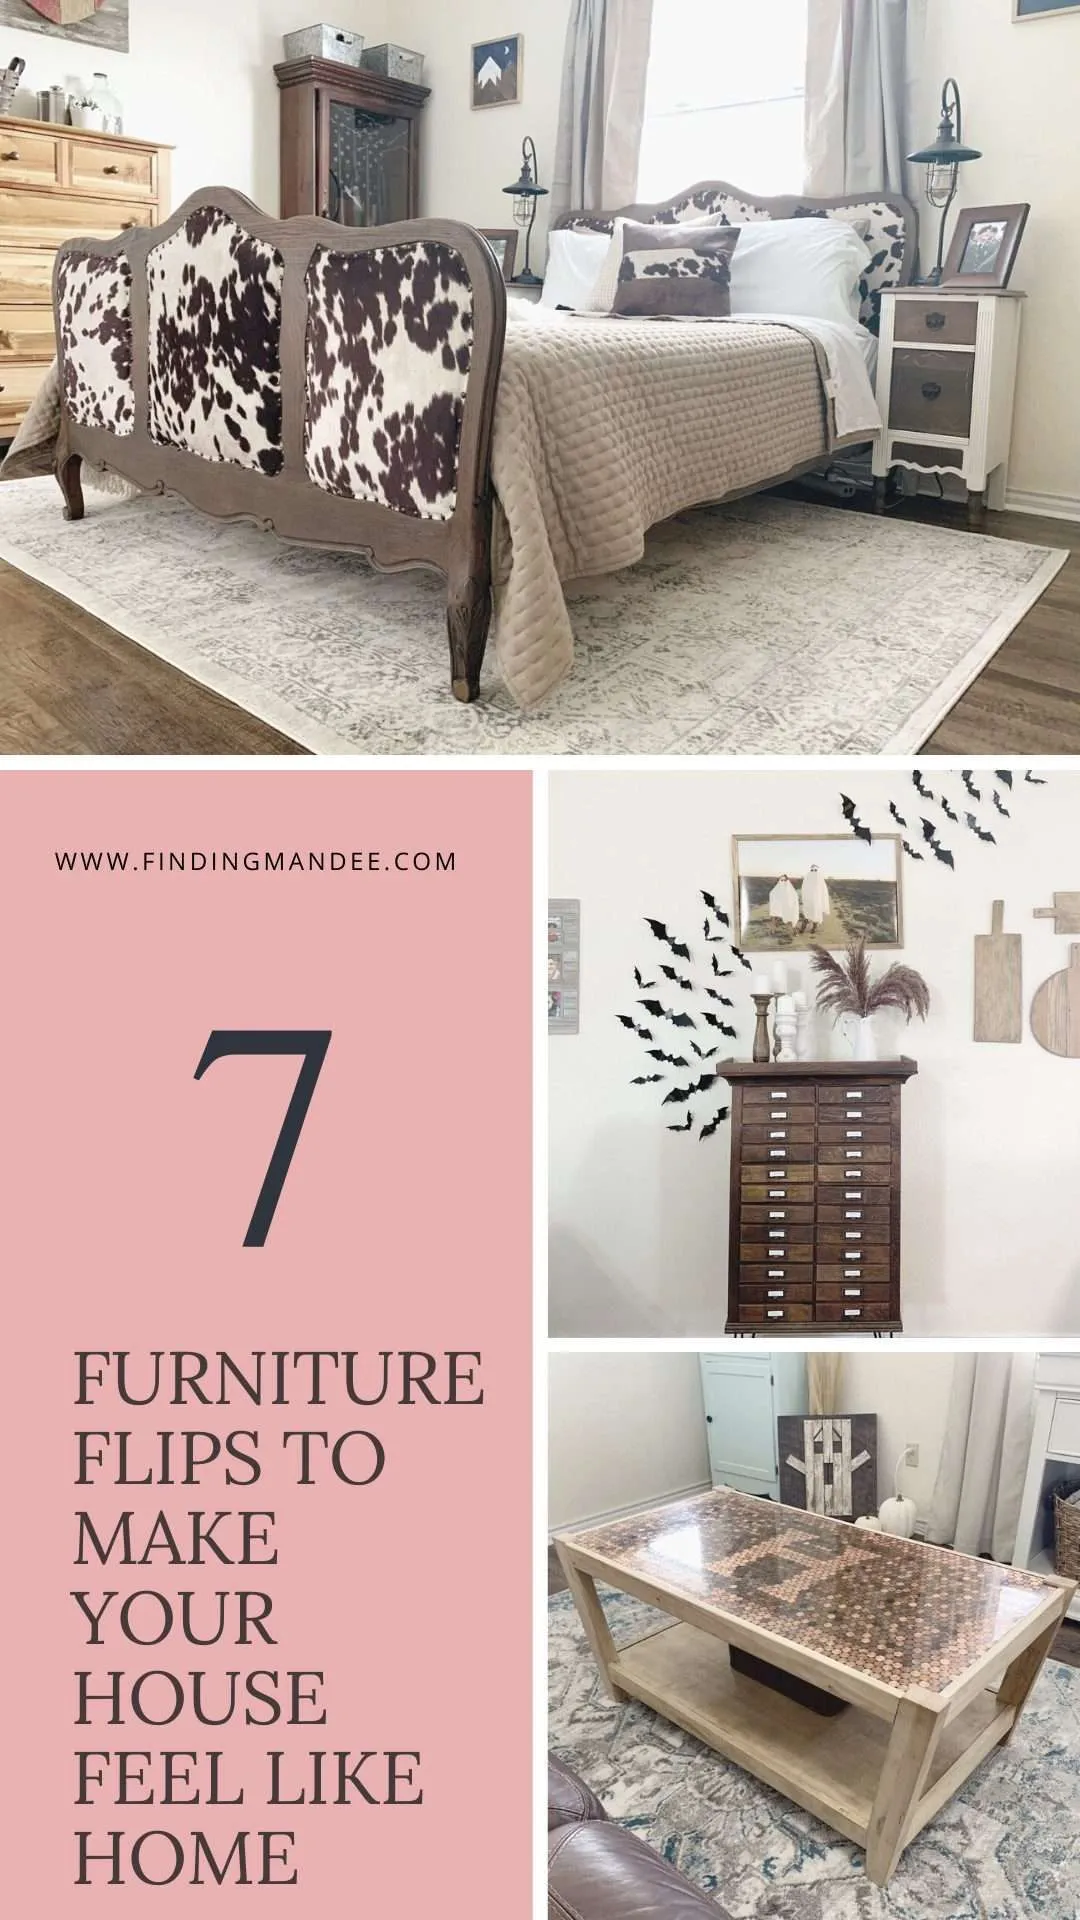 7 Furniture Flips to Make Your House Feel Like Home | Finding Mandee